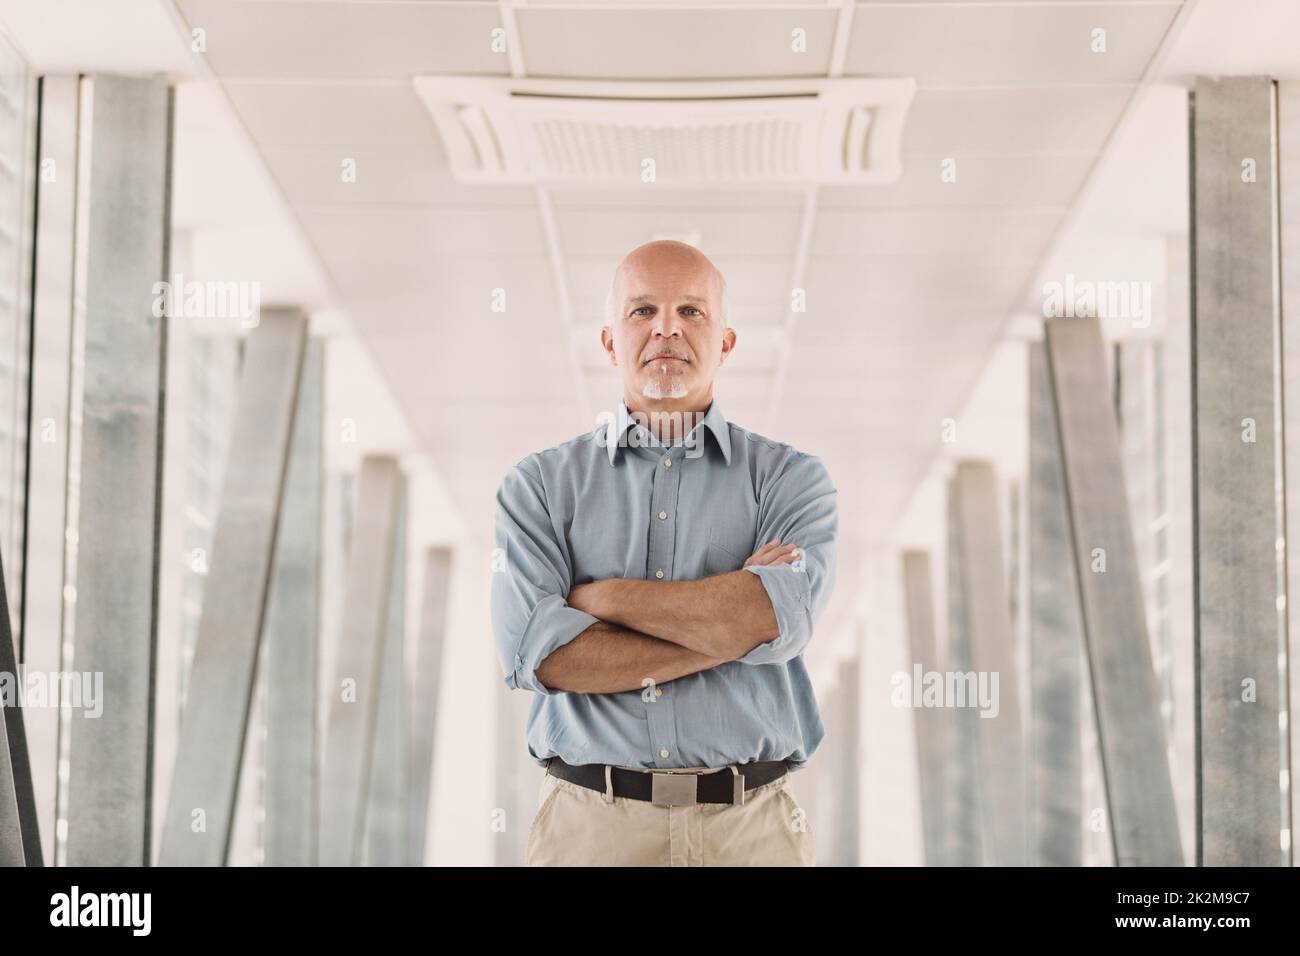 Half-length portrait of a man in the middle of a very modern hallway Stock Photo